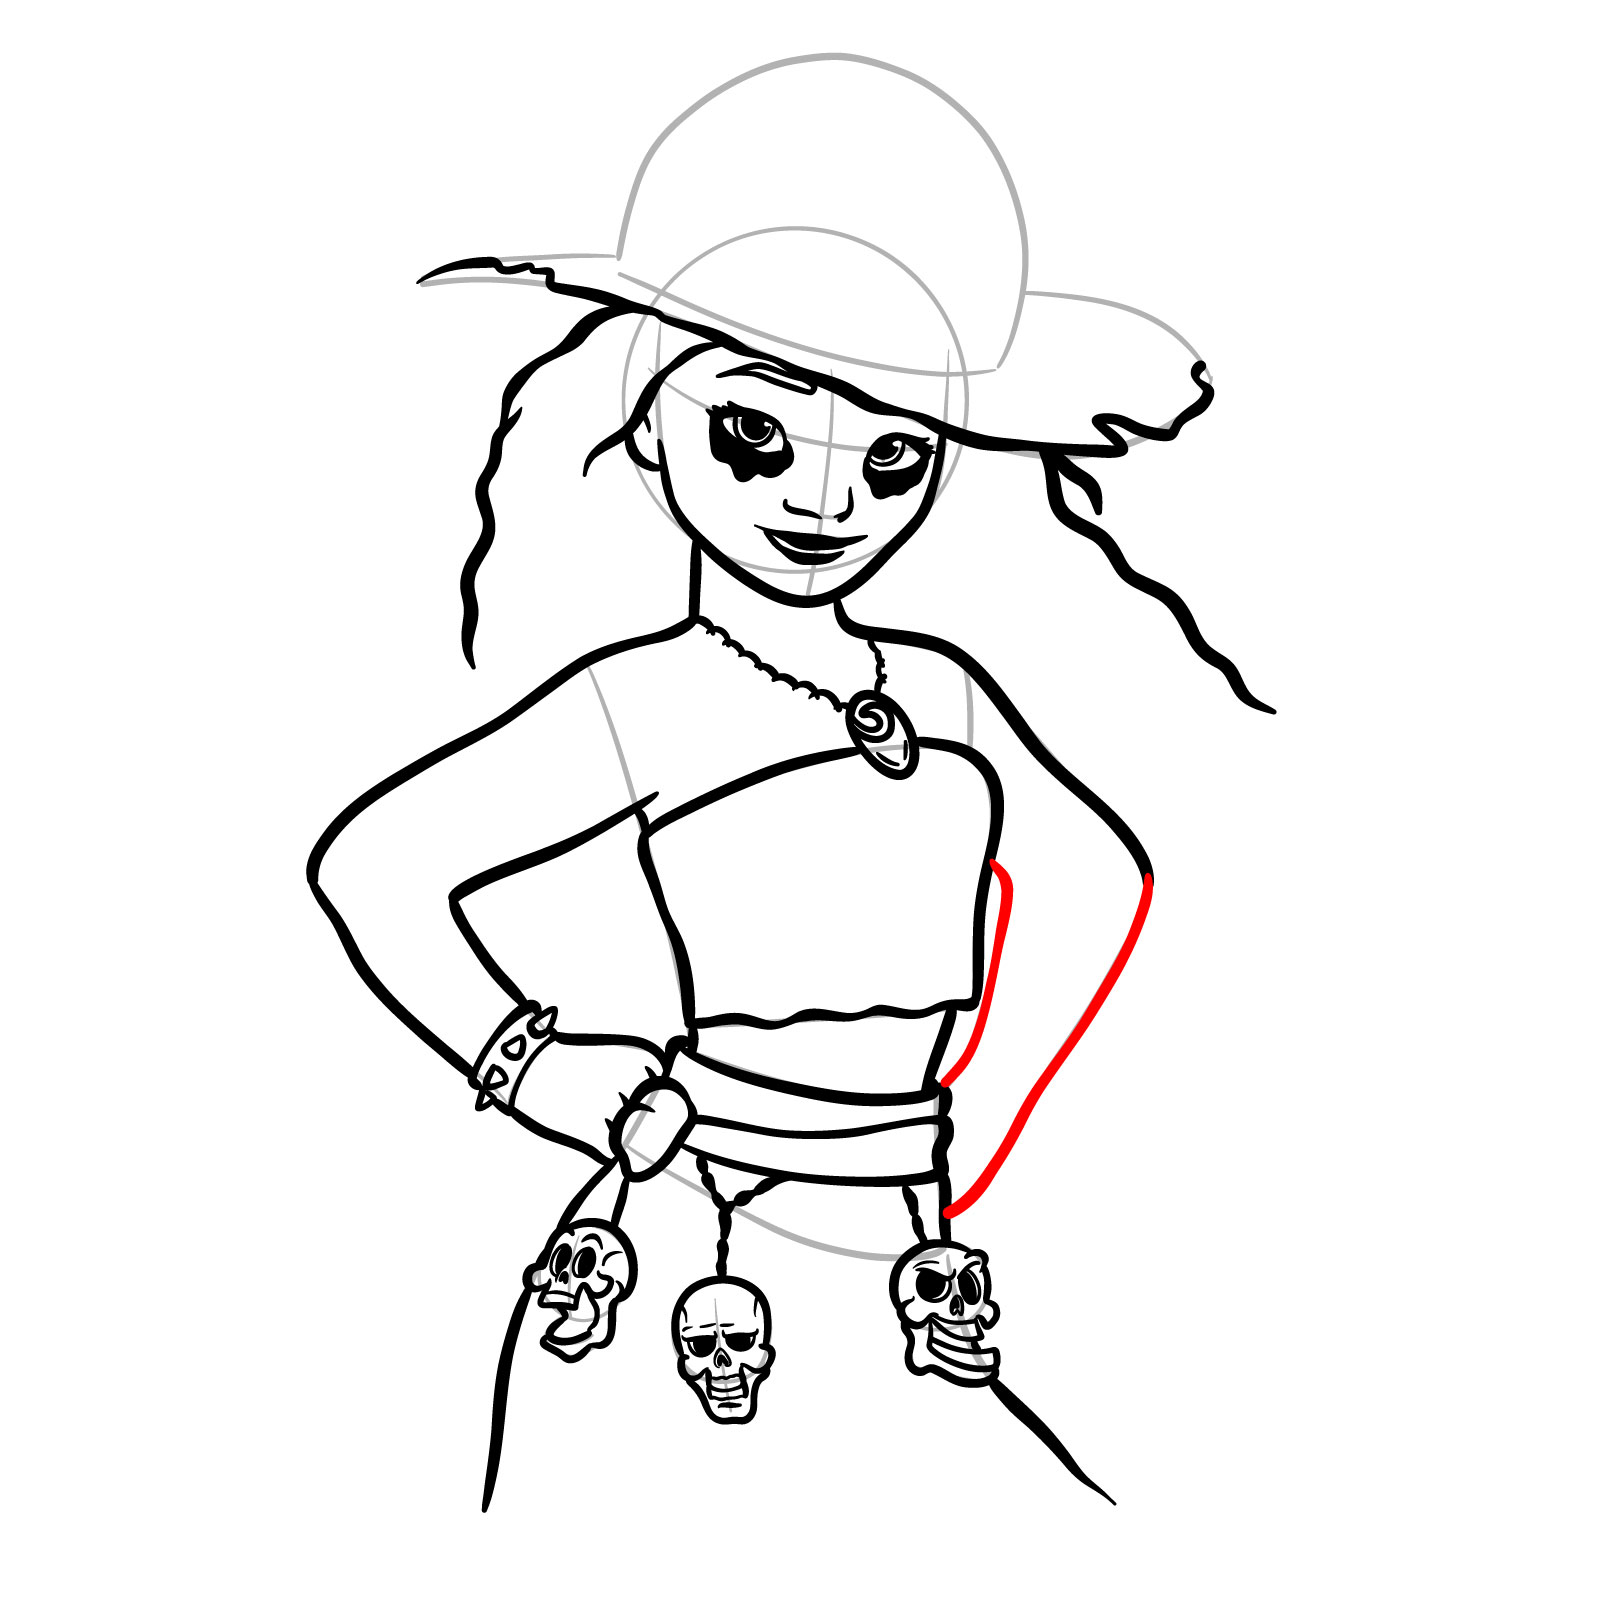 How to Draw Halloween Moana as a Staw Hat Pirate - step 31